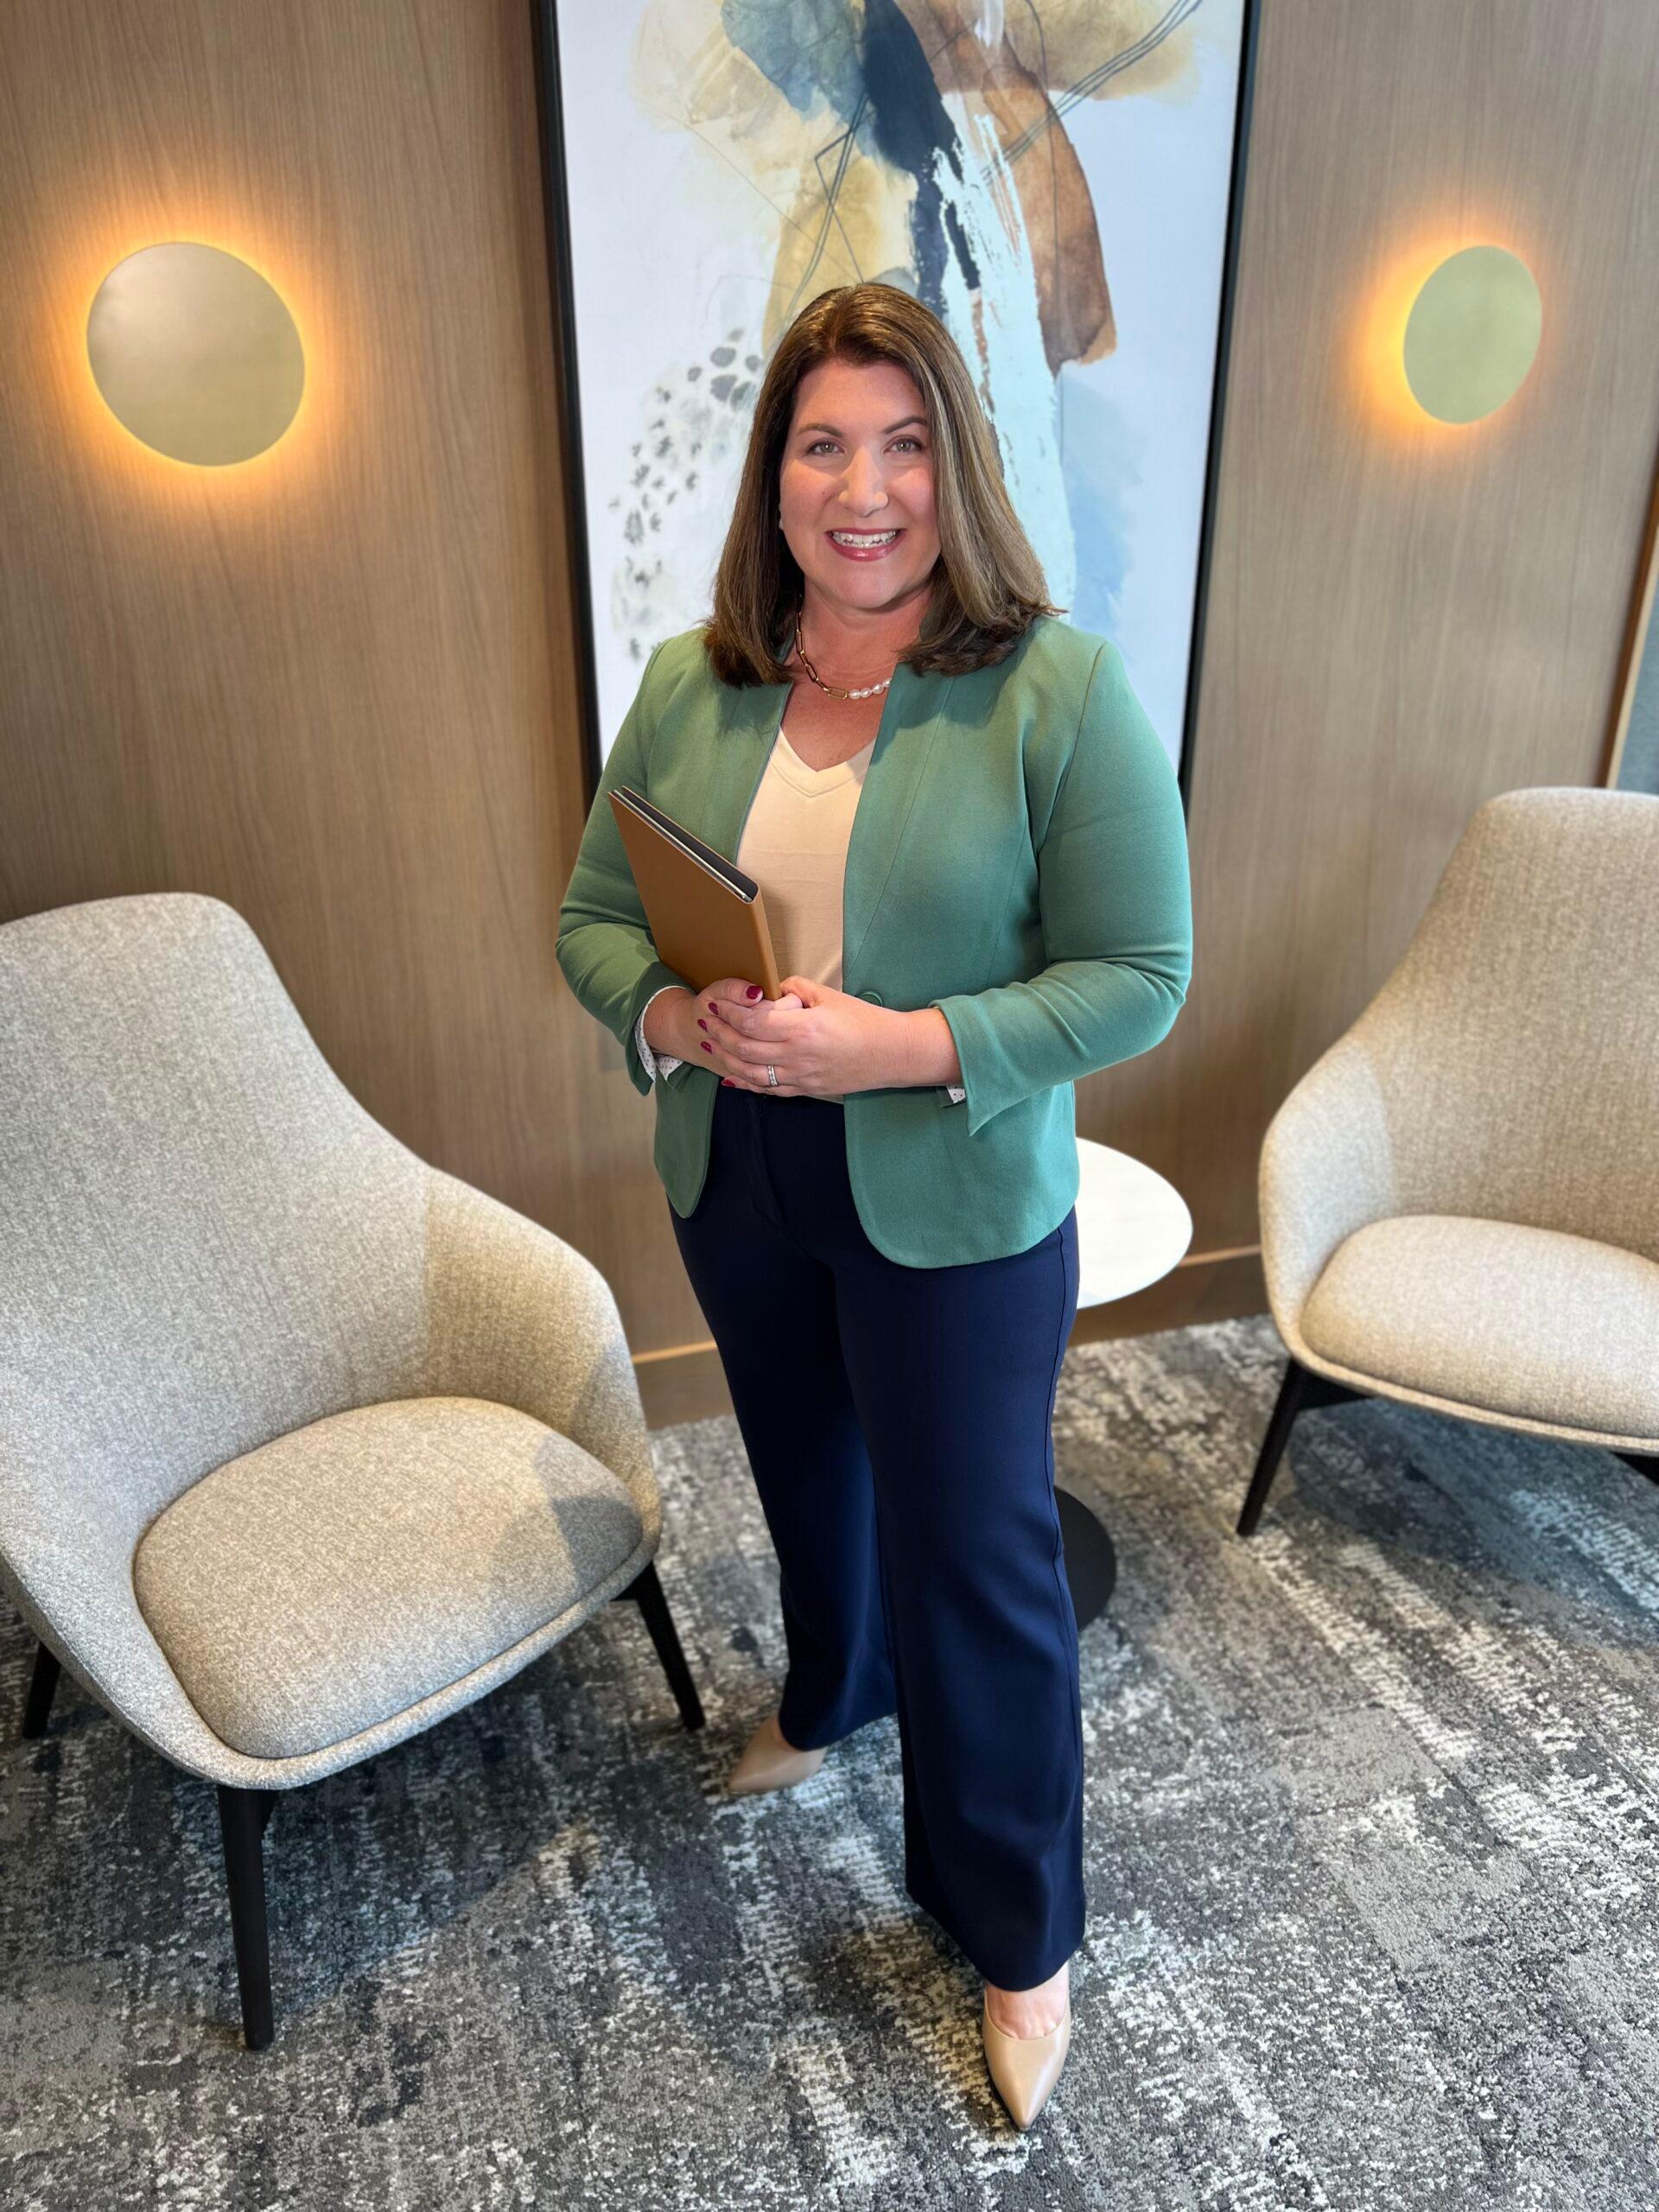 Attorney Amy Griggs founded Tysons Trial Law in the summer of 2023. Amy celebrated 20 years of practicing in civil litigation by creating a law firm in the modern, tech-savvy, client-centered mold she envisioned because she wanted clients to feel empowered during the process.